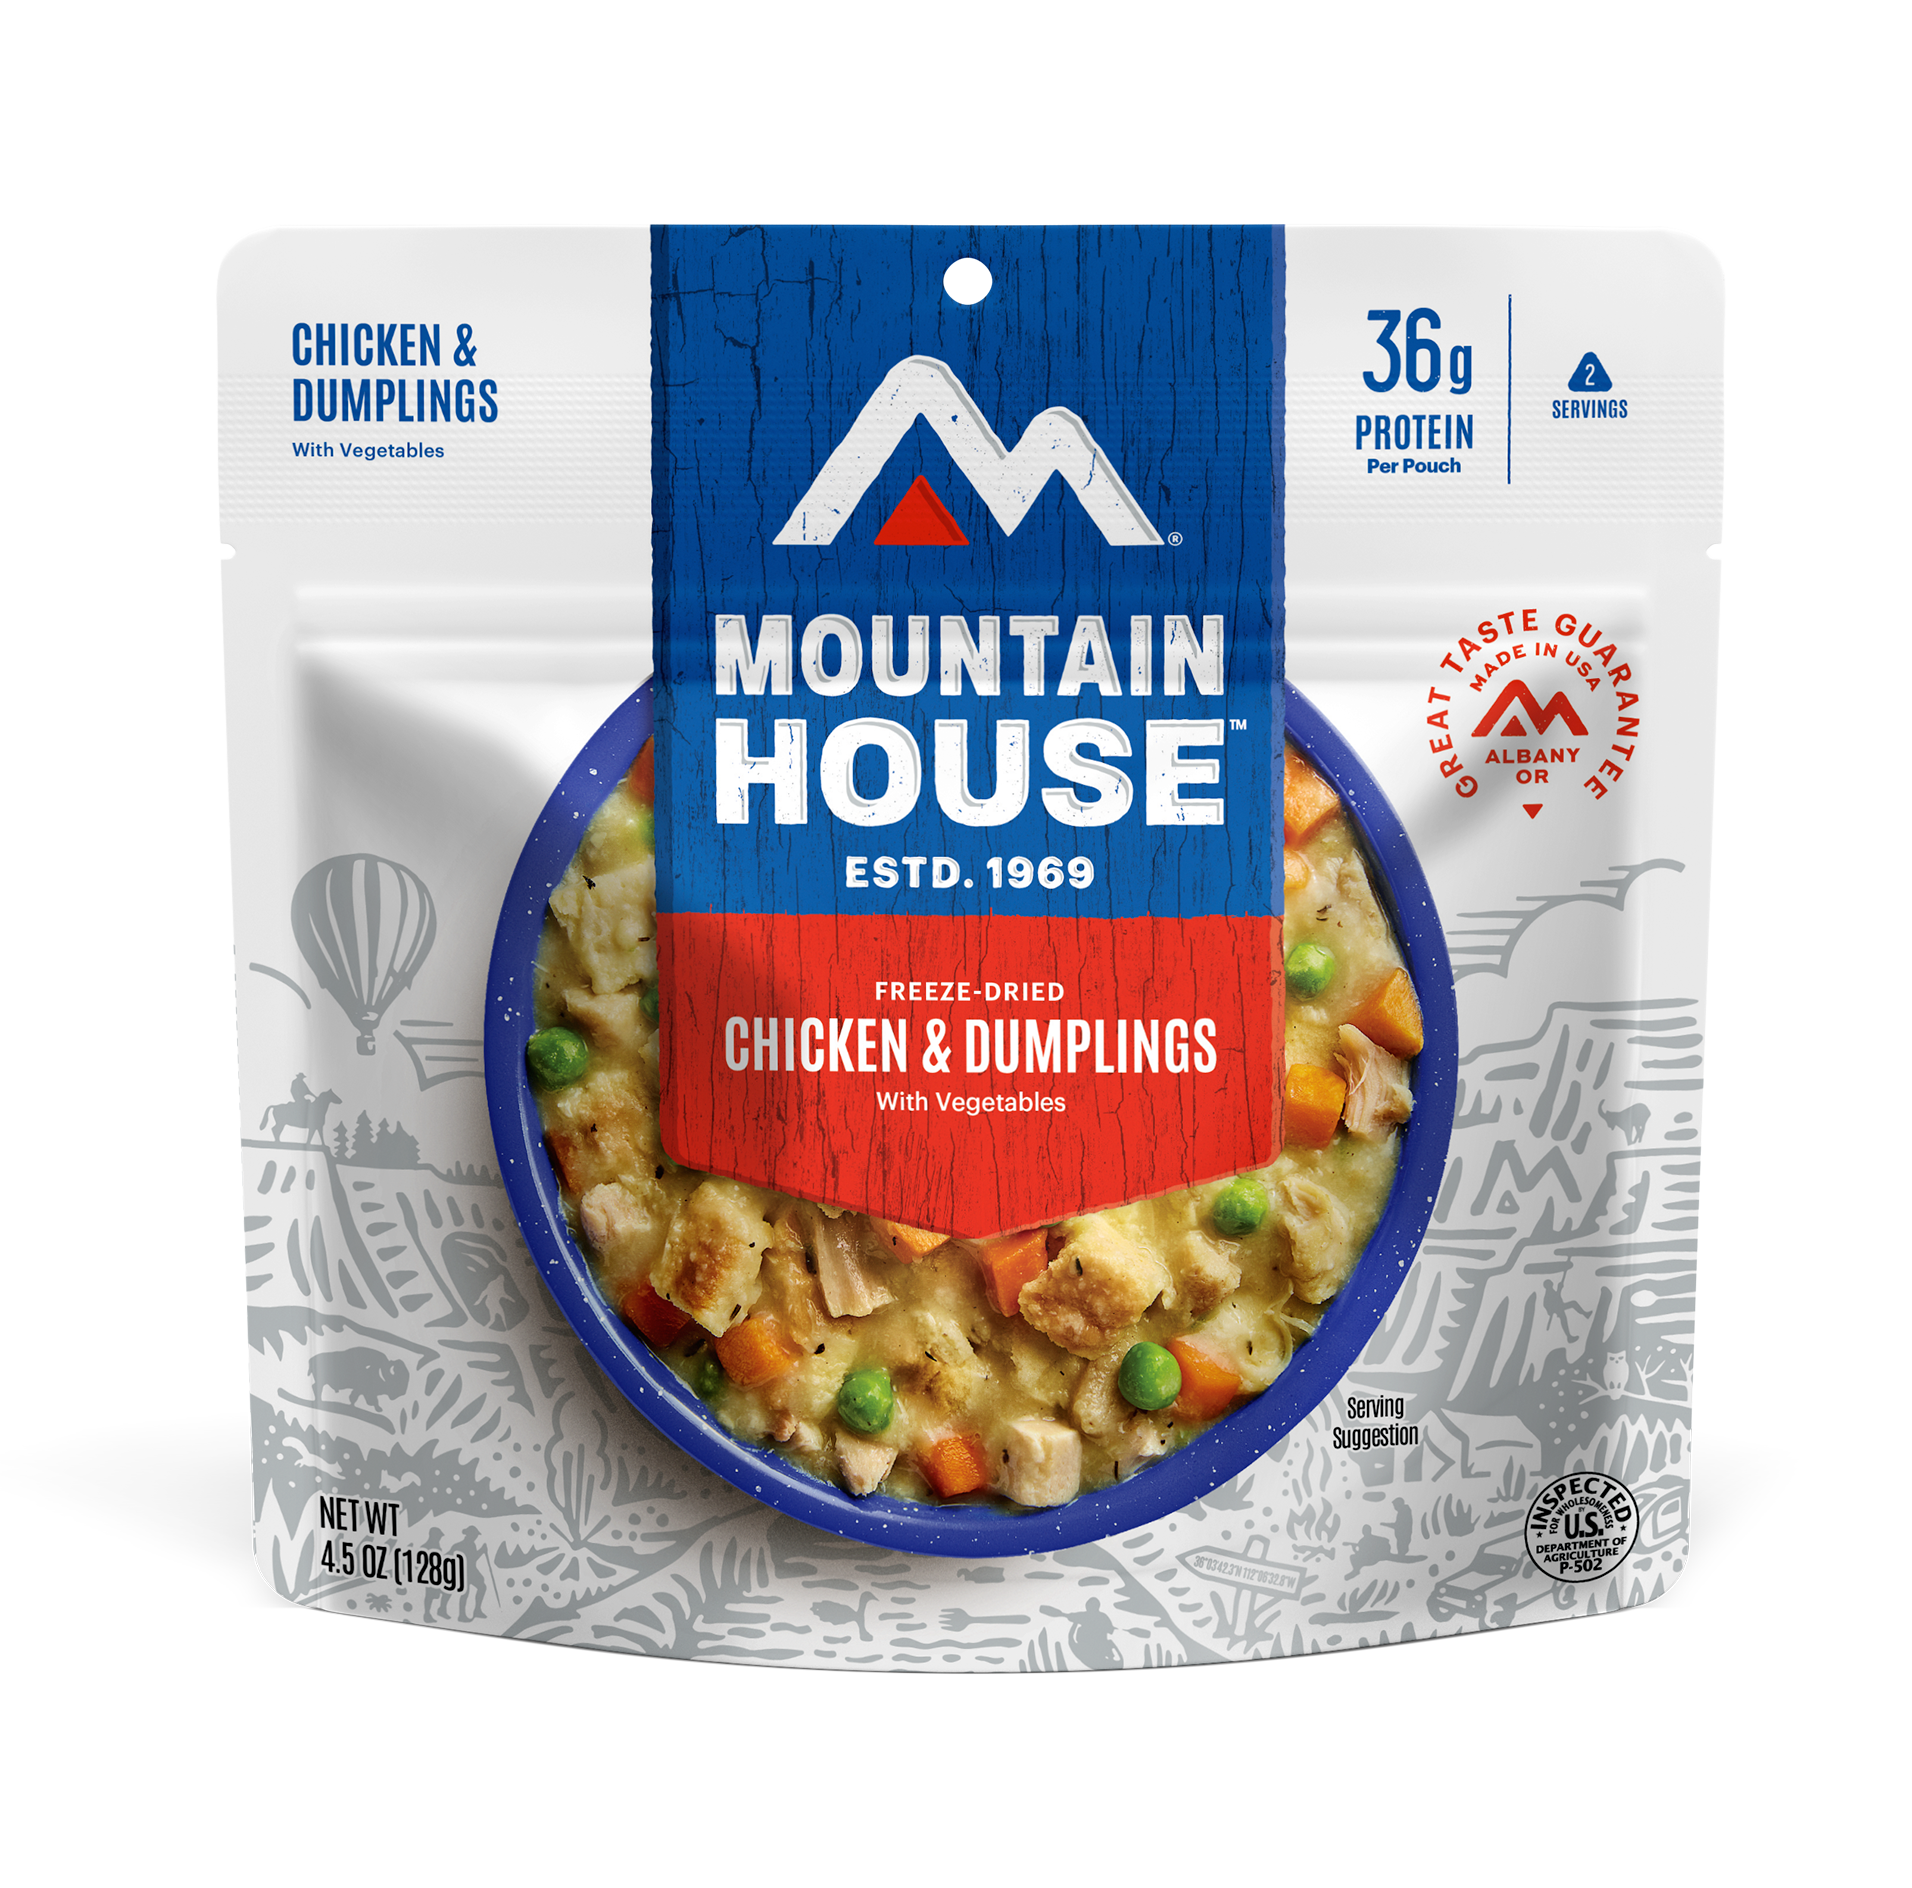 Mountain House new pouch